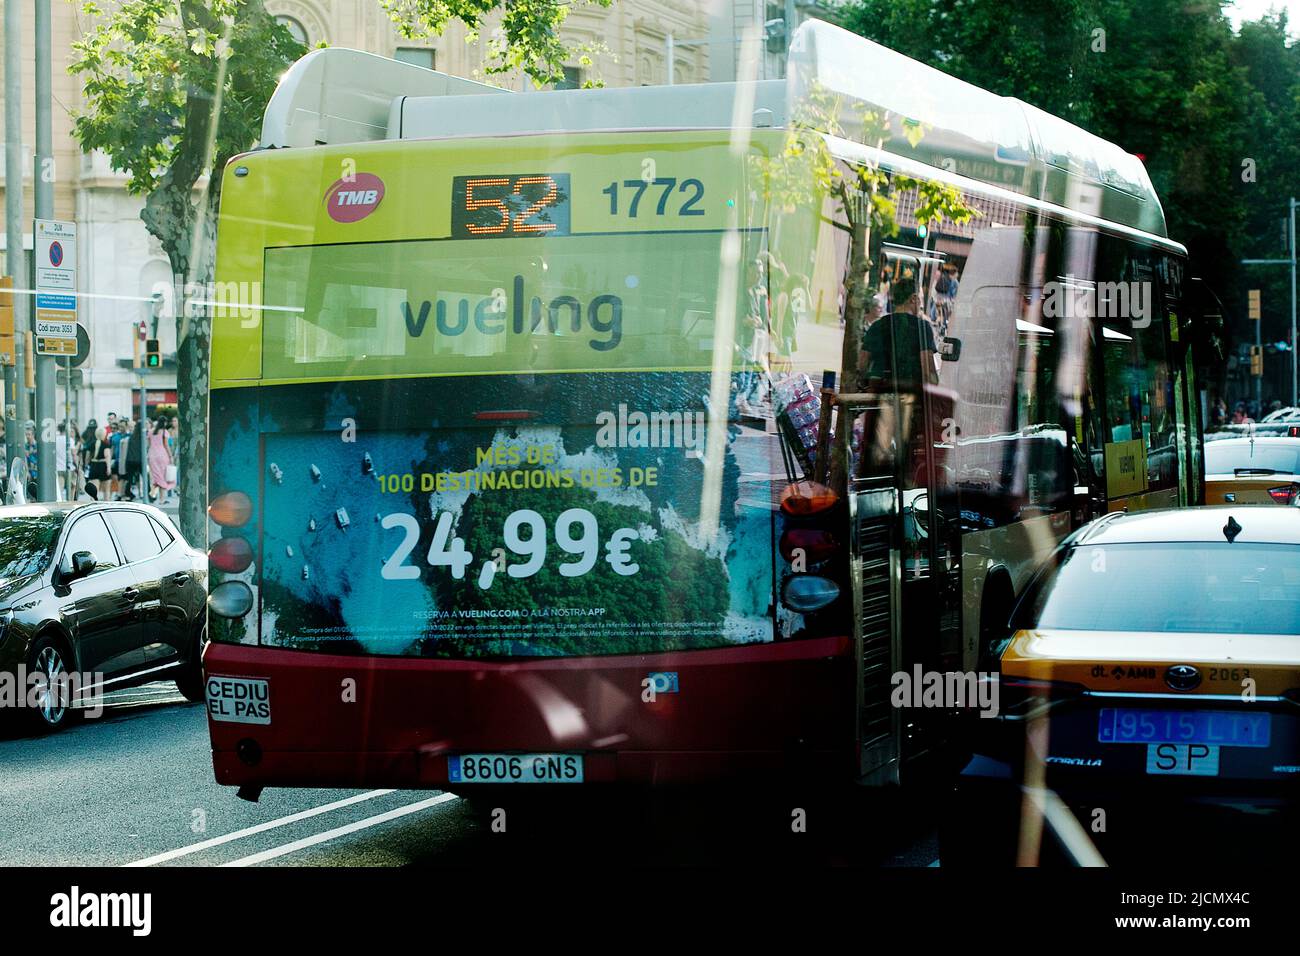 Gas fueled bus, Barcelona, Spain. Stock Photo